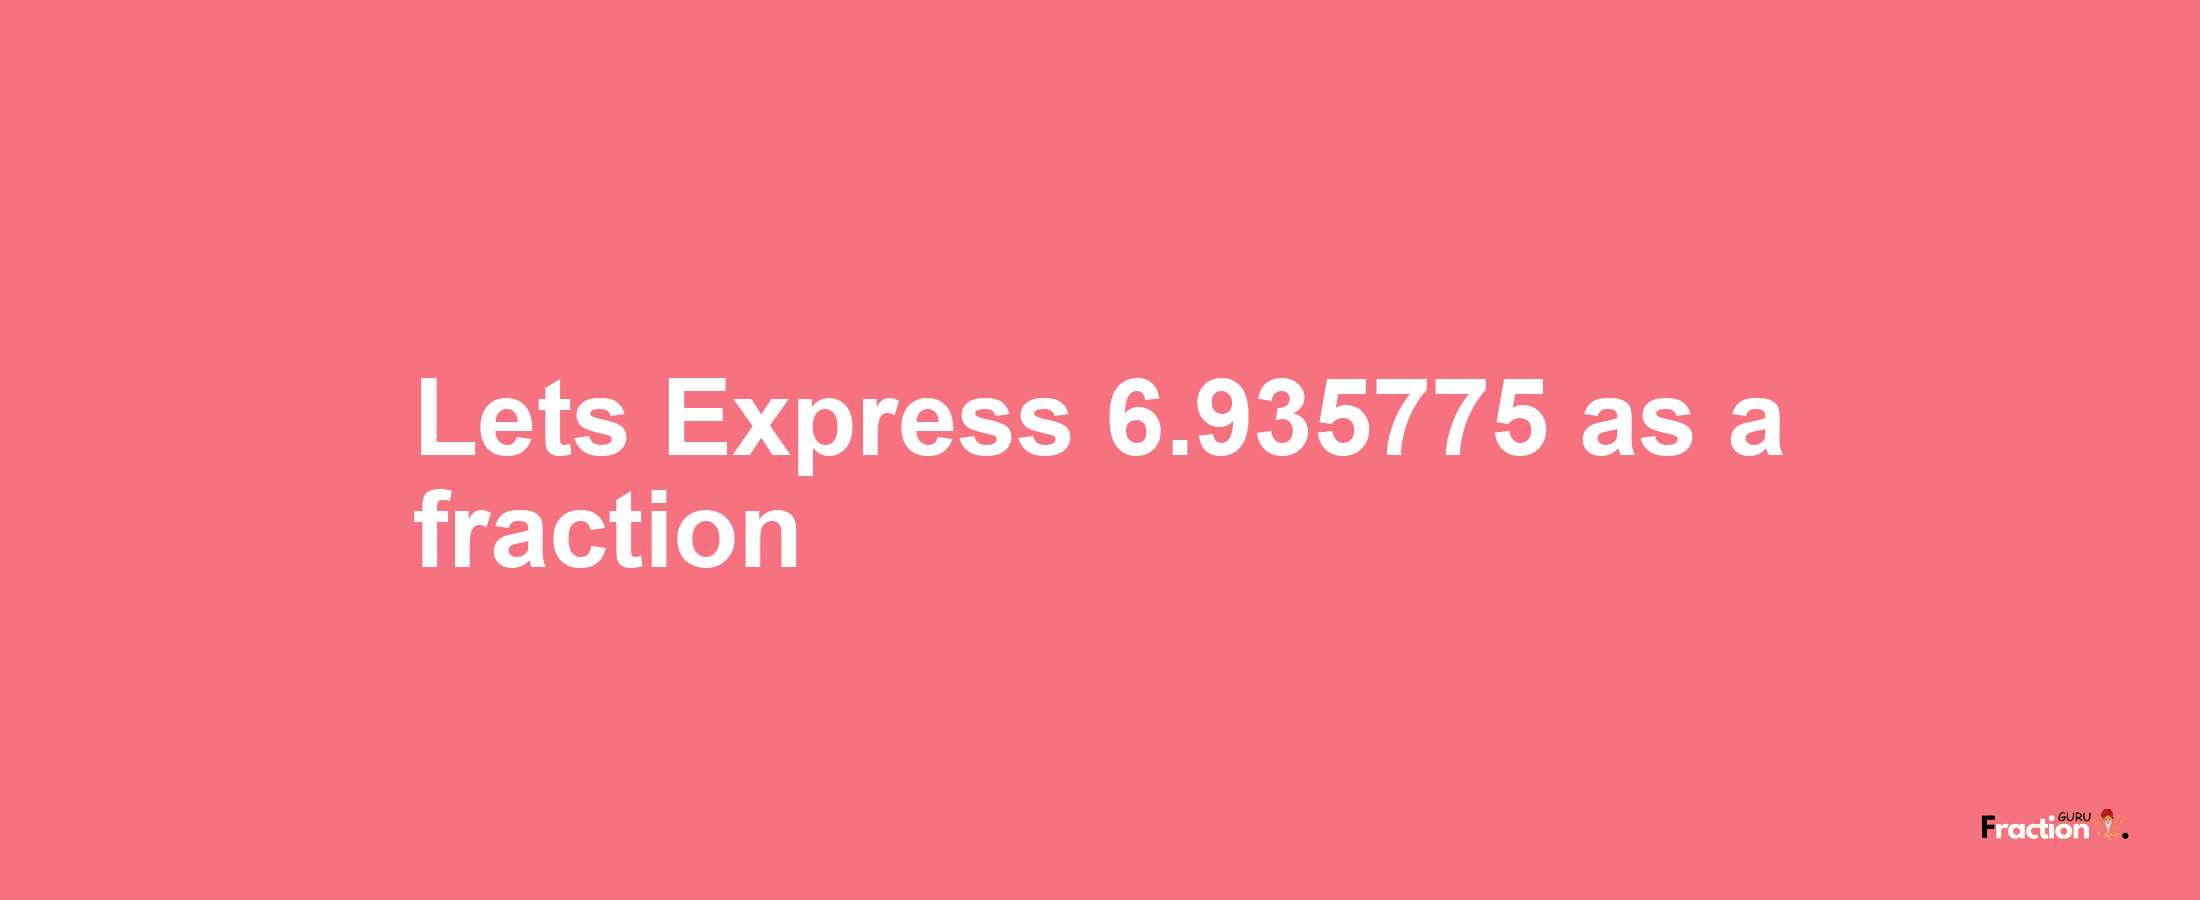 Lets Express 6.935775 as afraction